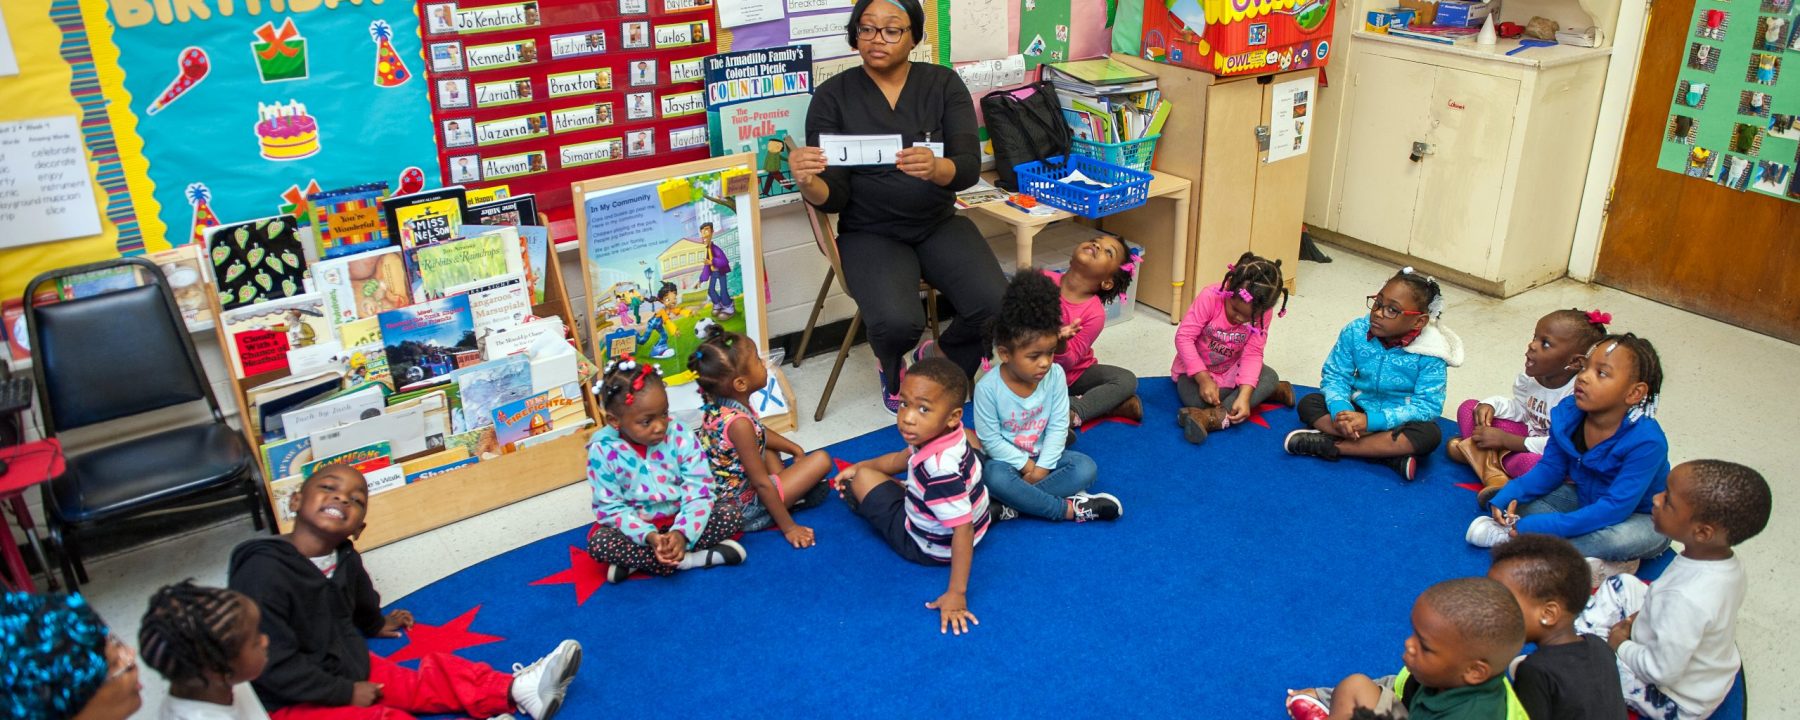 Mississippi will receive $30 million over 3 years to improve access to high-quality early care and education programs.